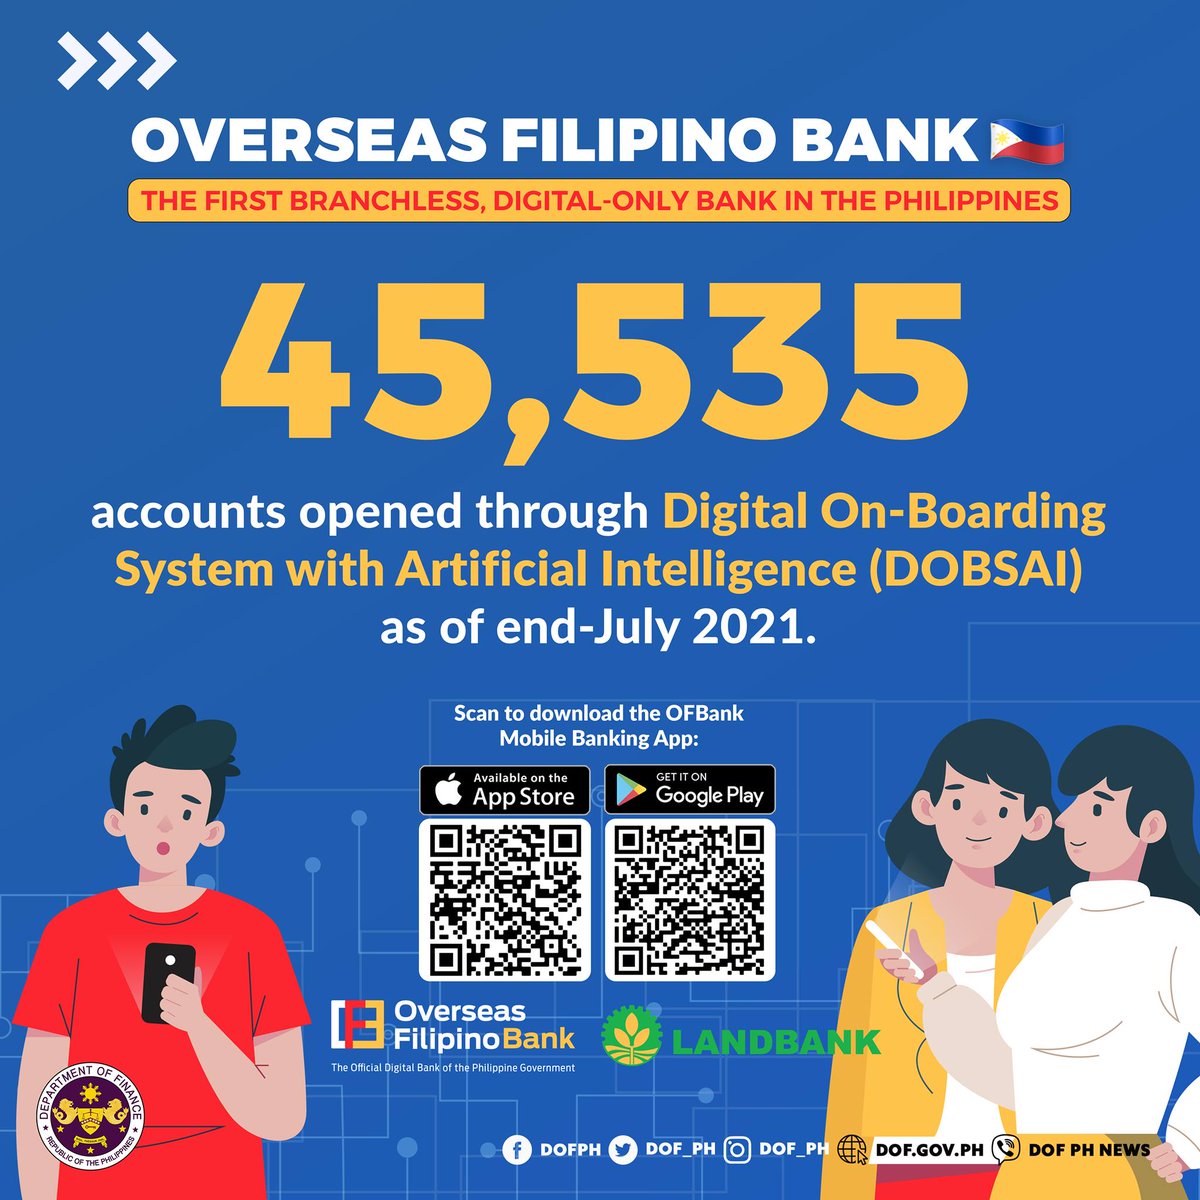 Deposit accounts opened through the Overseas Filipino Bank (OFBank)’s digital onboarding system have more than doubled as of July 2021, compared to the number of accounts in December last year.

OFBank is a wholly owned subsidiary bank of @LBP_Official.